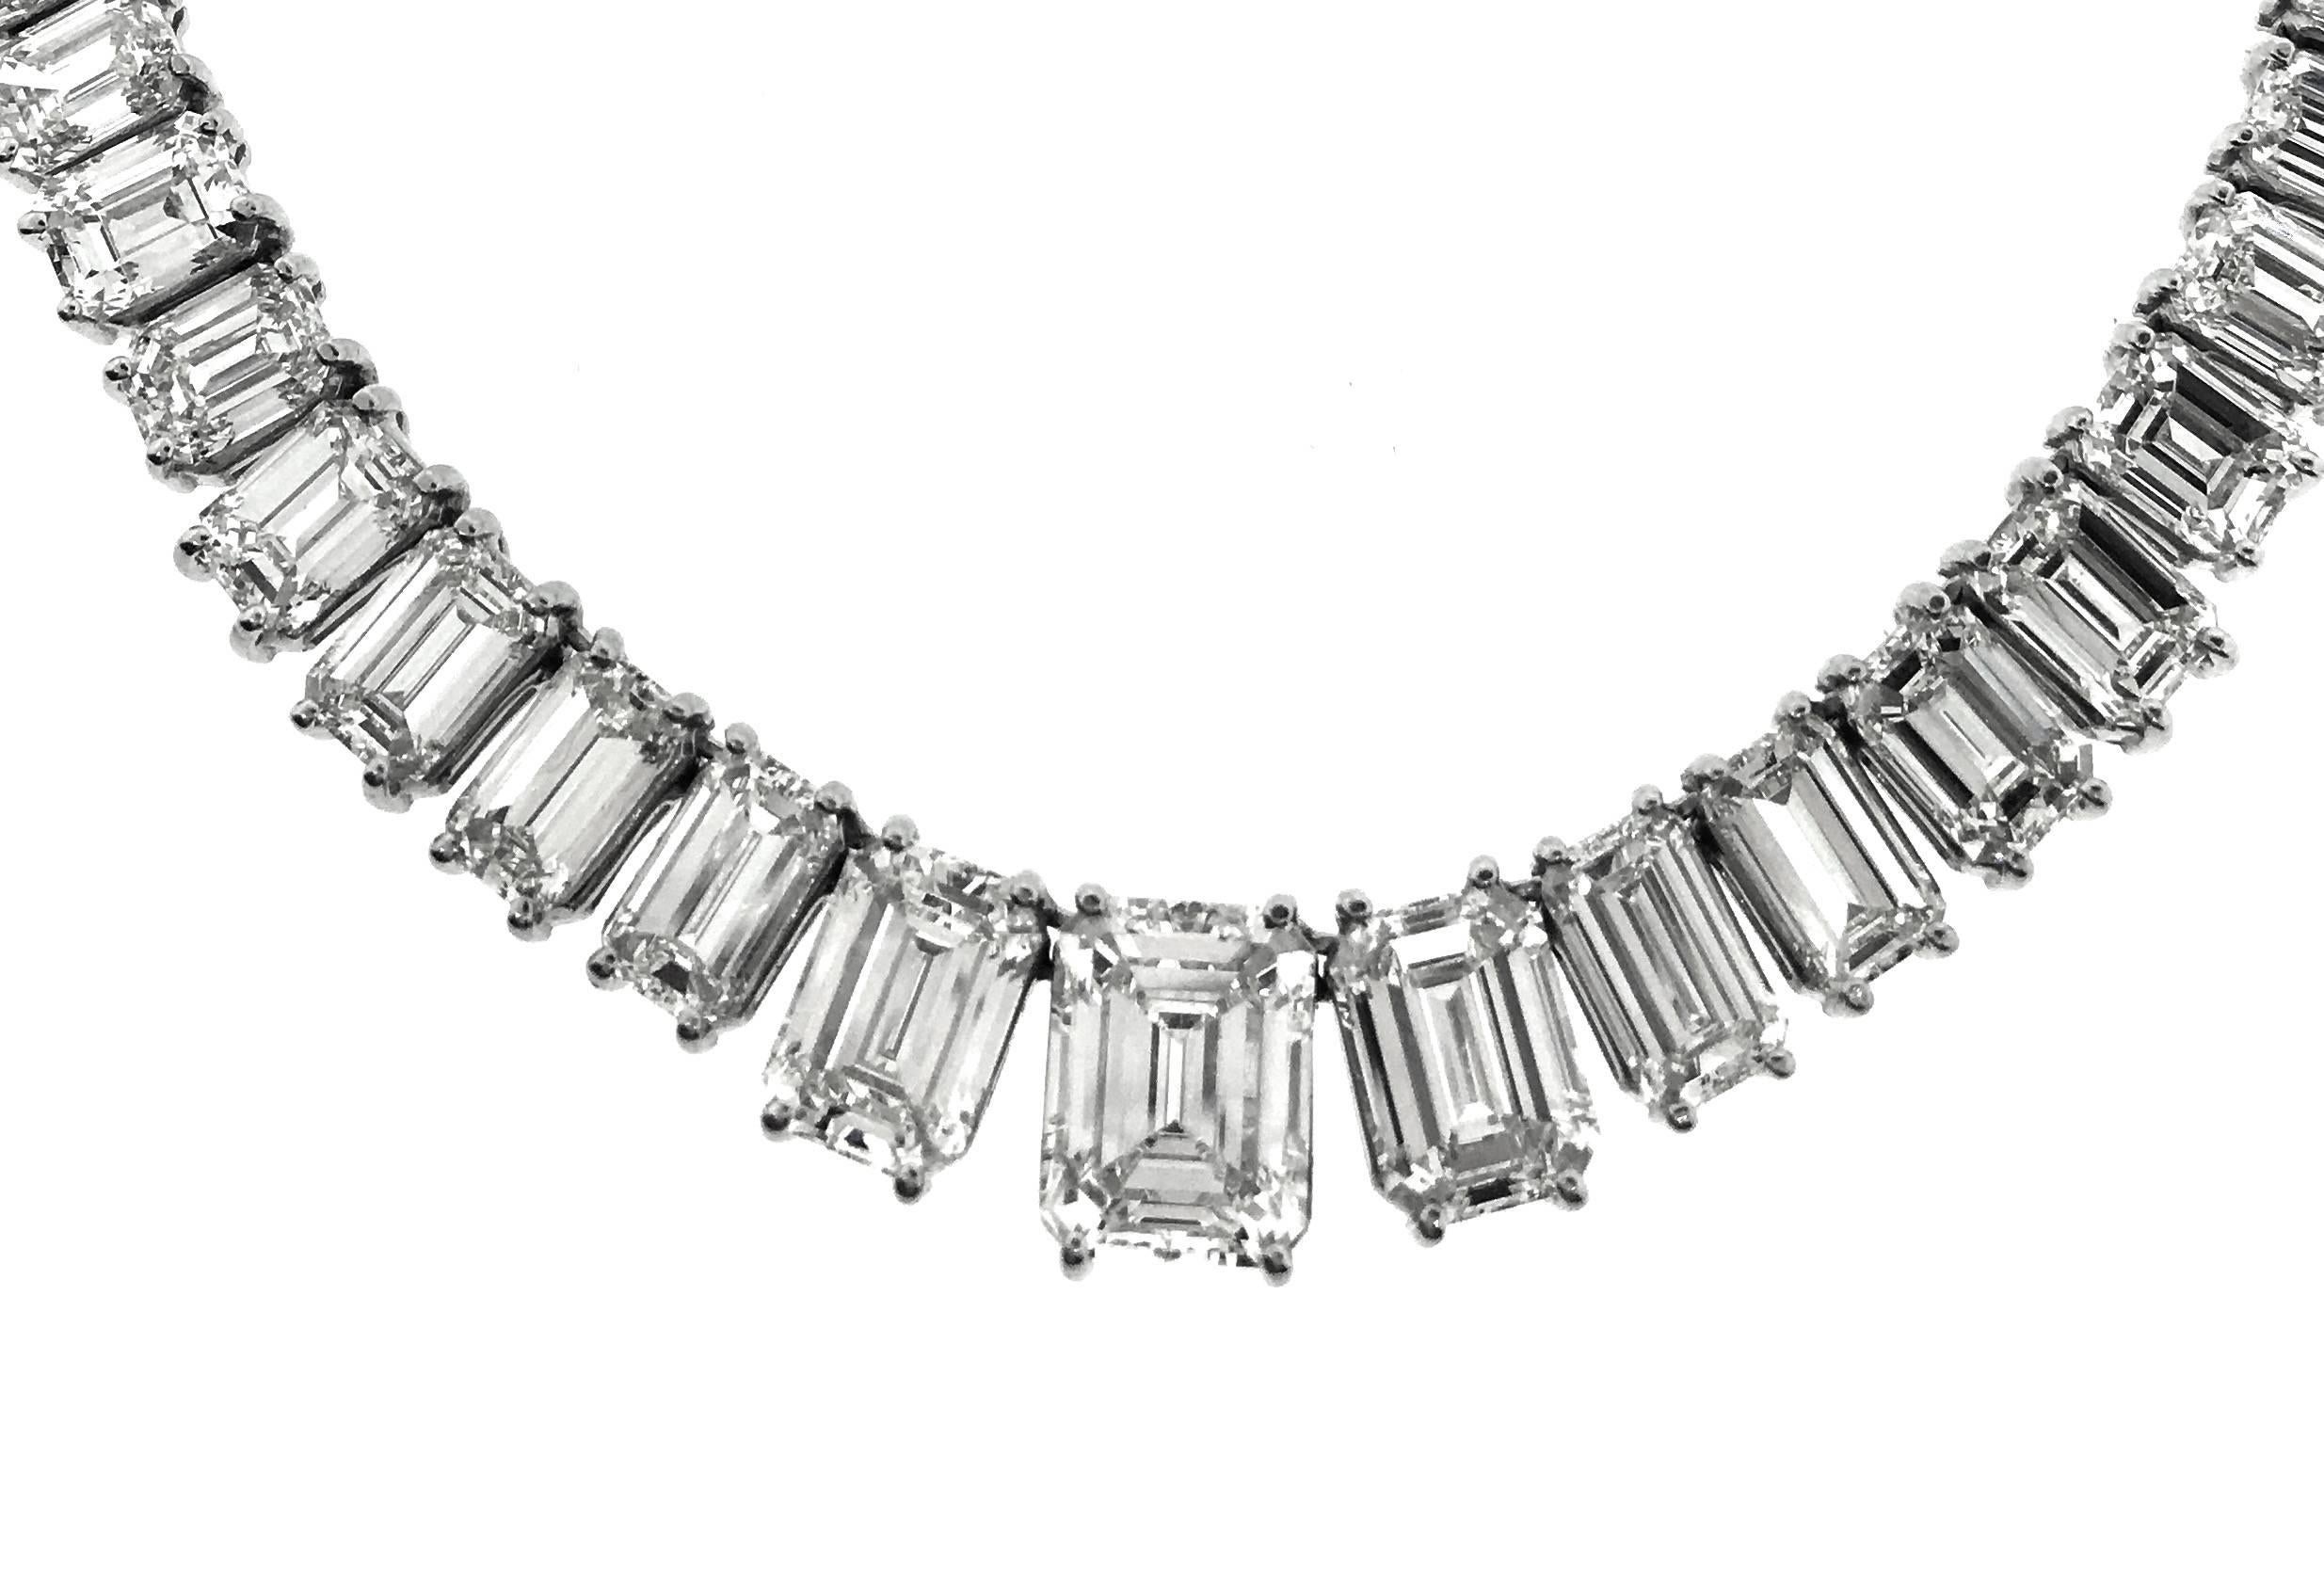 Diamond riviera necklace features 108 graduated Emerald cut diamonds with each diamond individually prong set by hand. 66.69 carats total in diamond weight. High quality diamonds, estimated K-L in color and VS in clarity.
19.5 inches Platinum